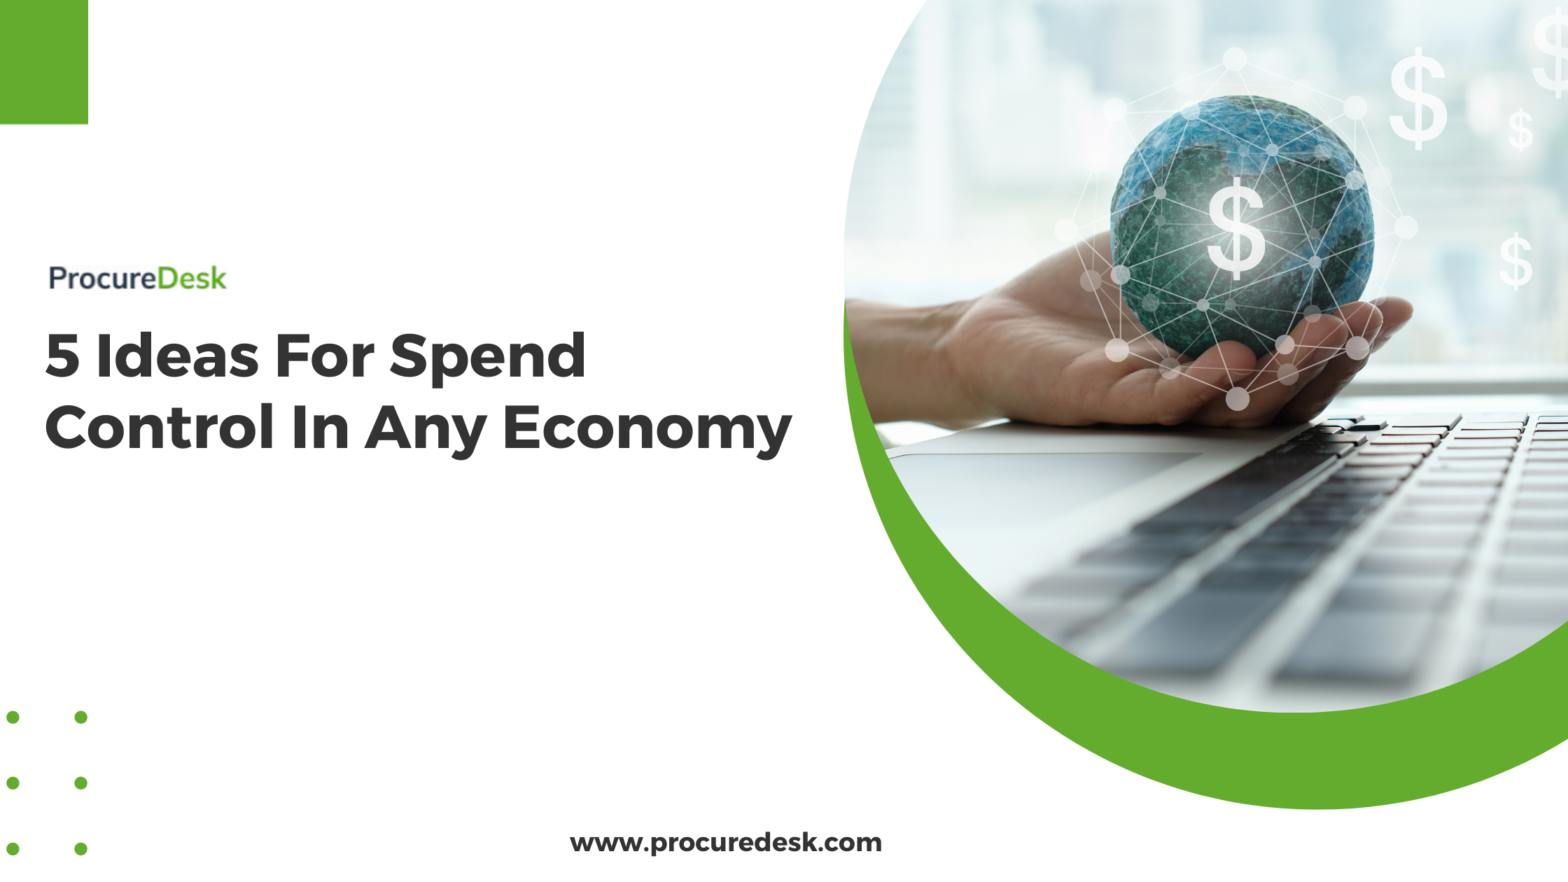 5 Ideas For Spend Control In Any Economy